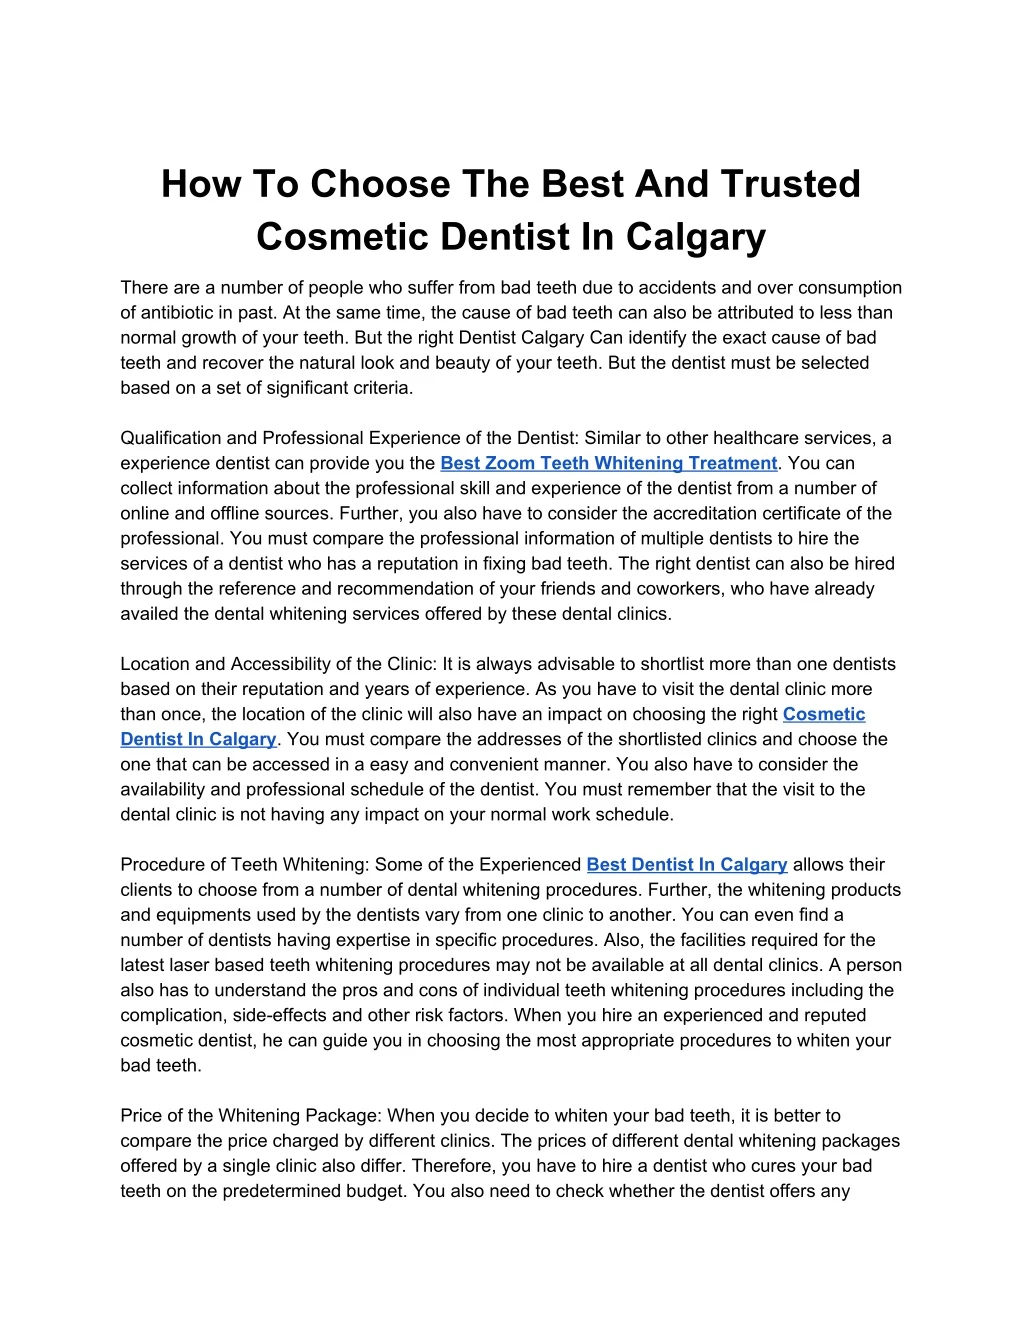 how to choose the best and trusted cosmetic